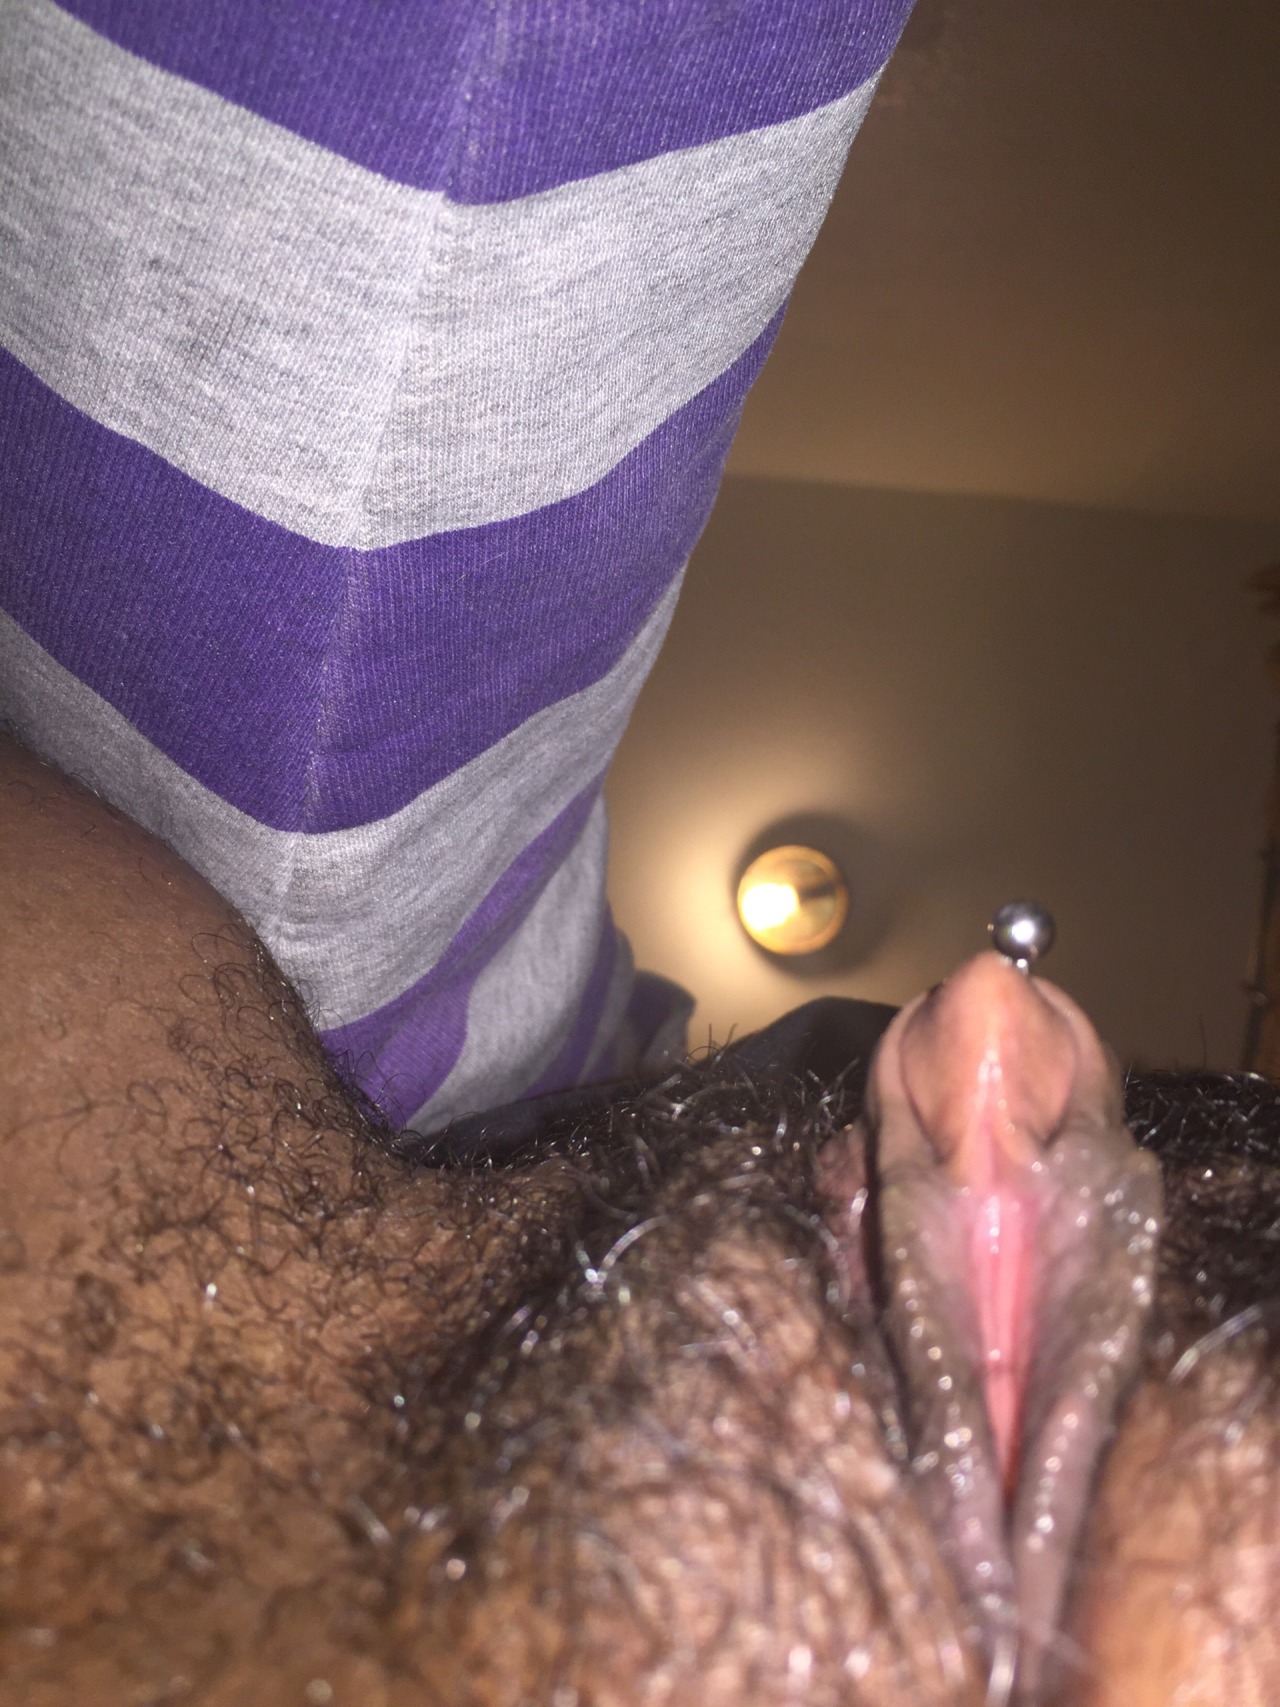 huge-wet-clit:  huge-wet-clit:  So close …  I love how much love me and my pussy